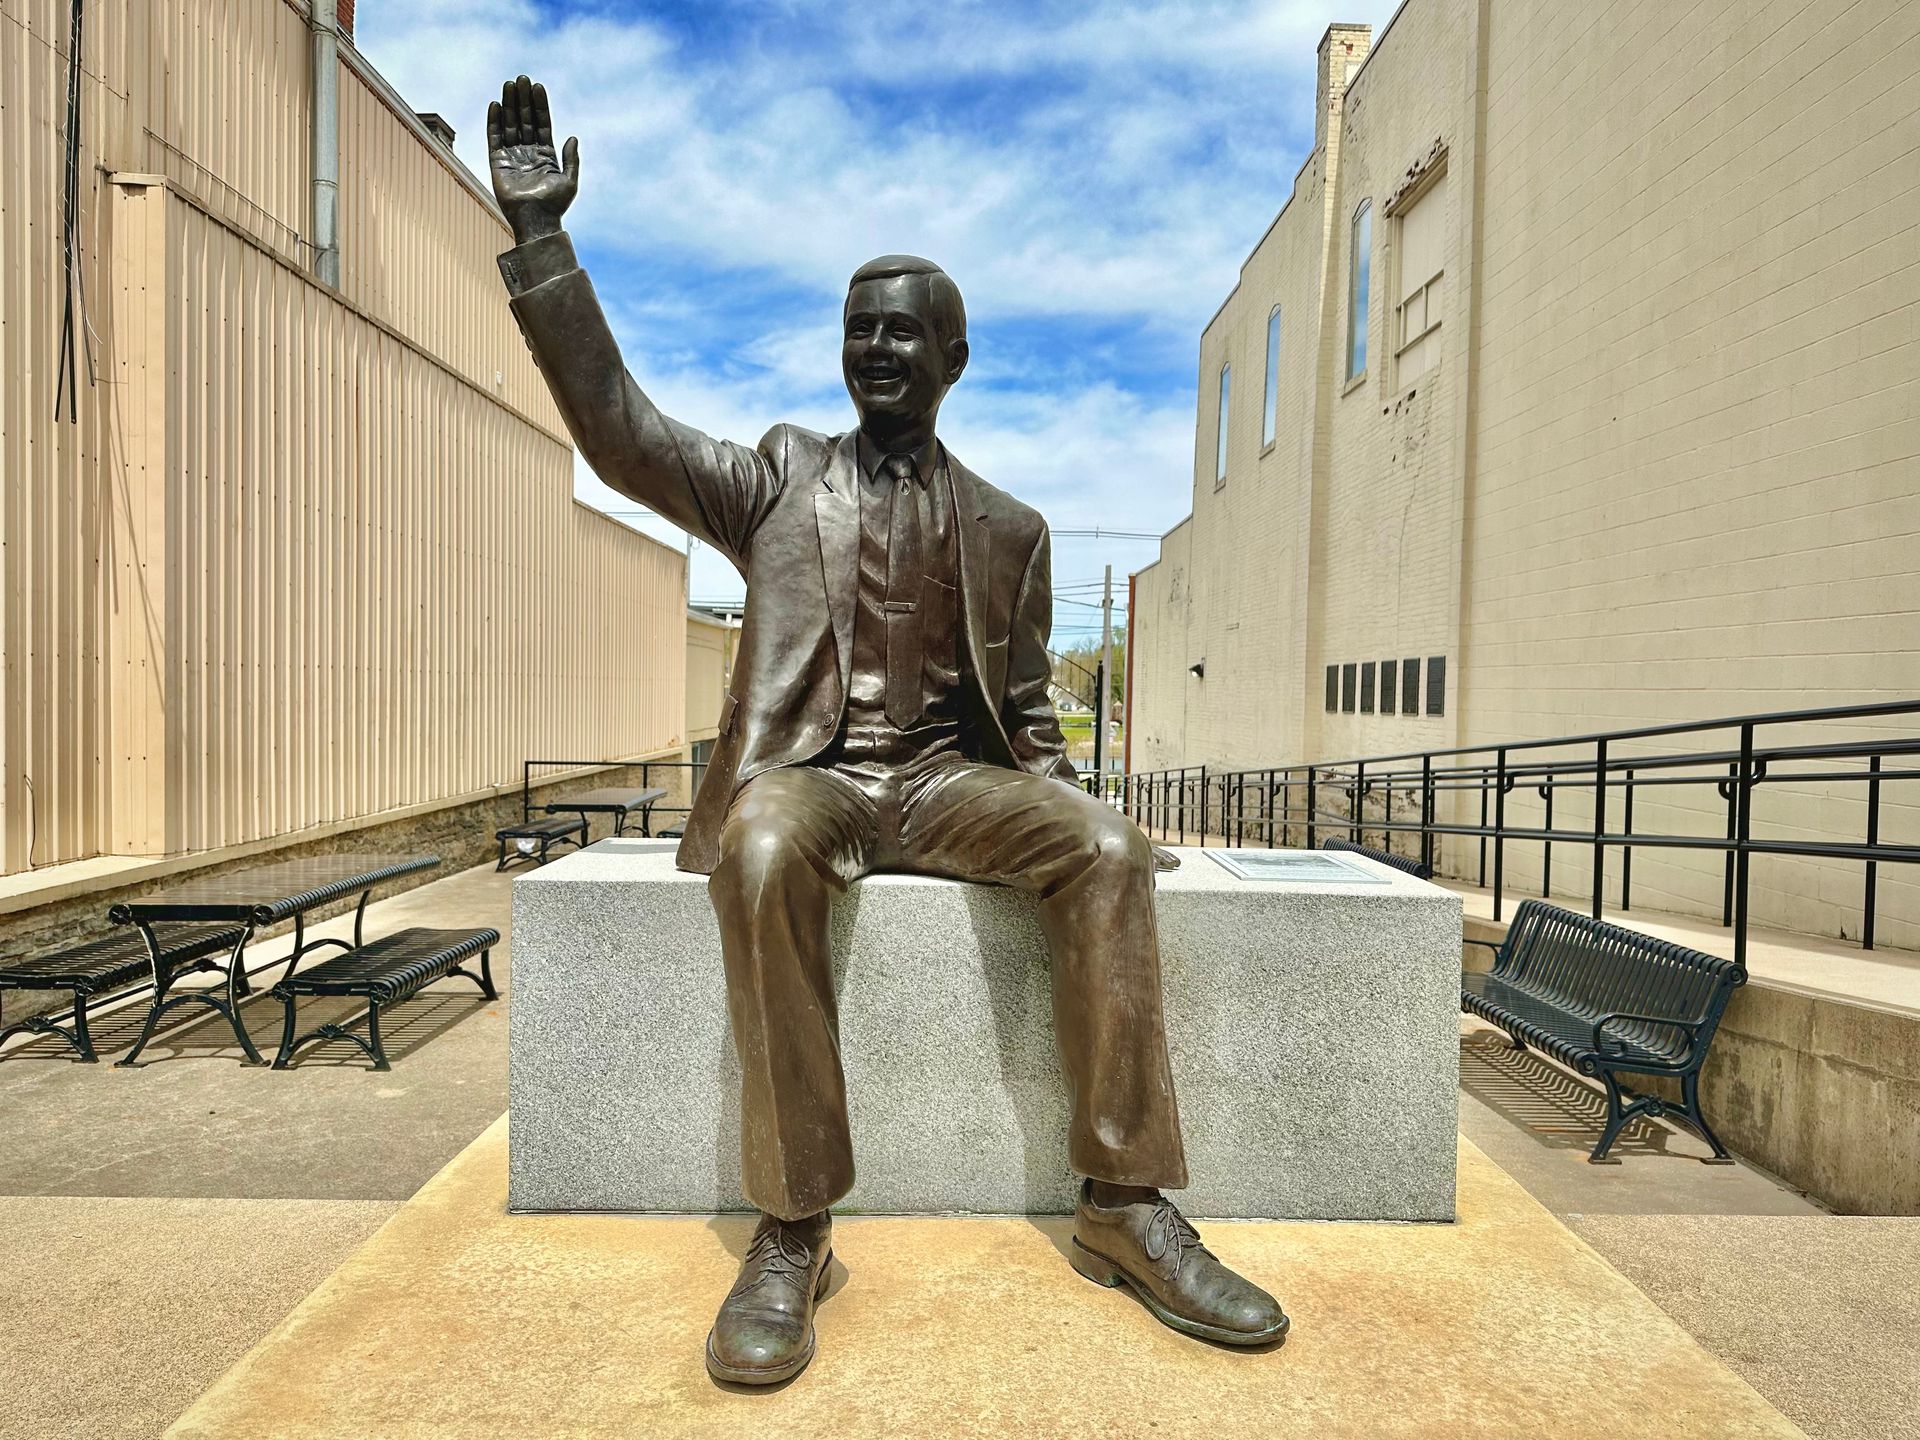 A life size bronze statue of Neil Armstrong waving.